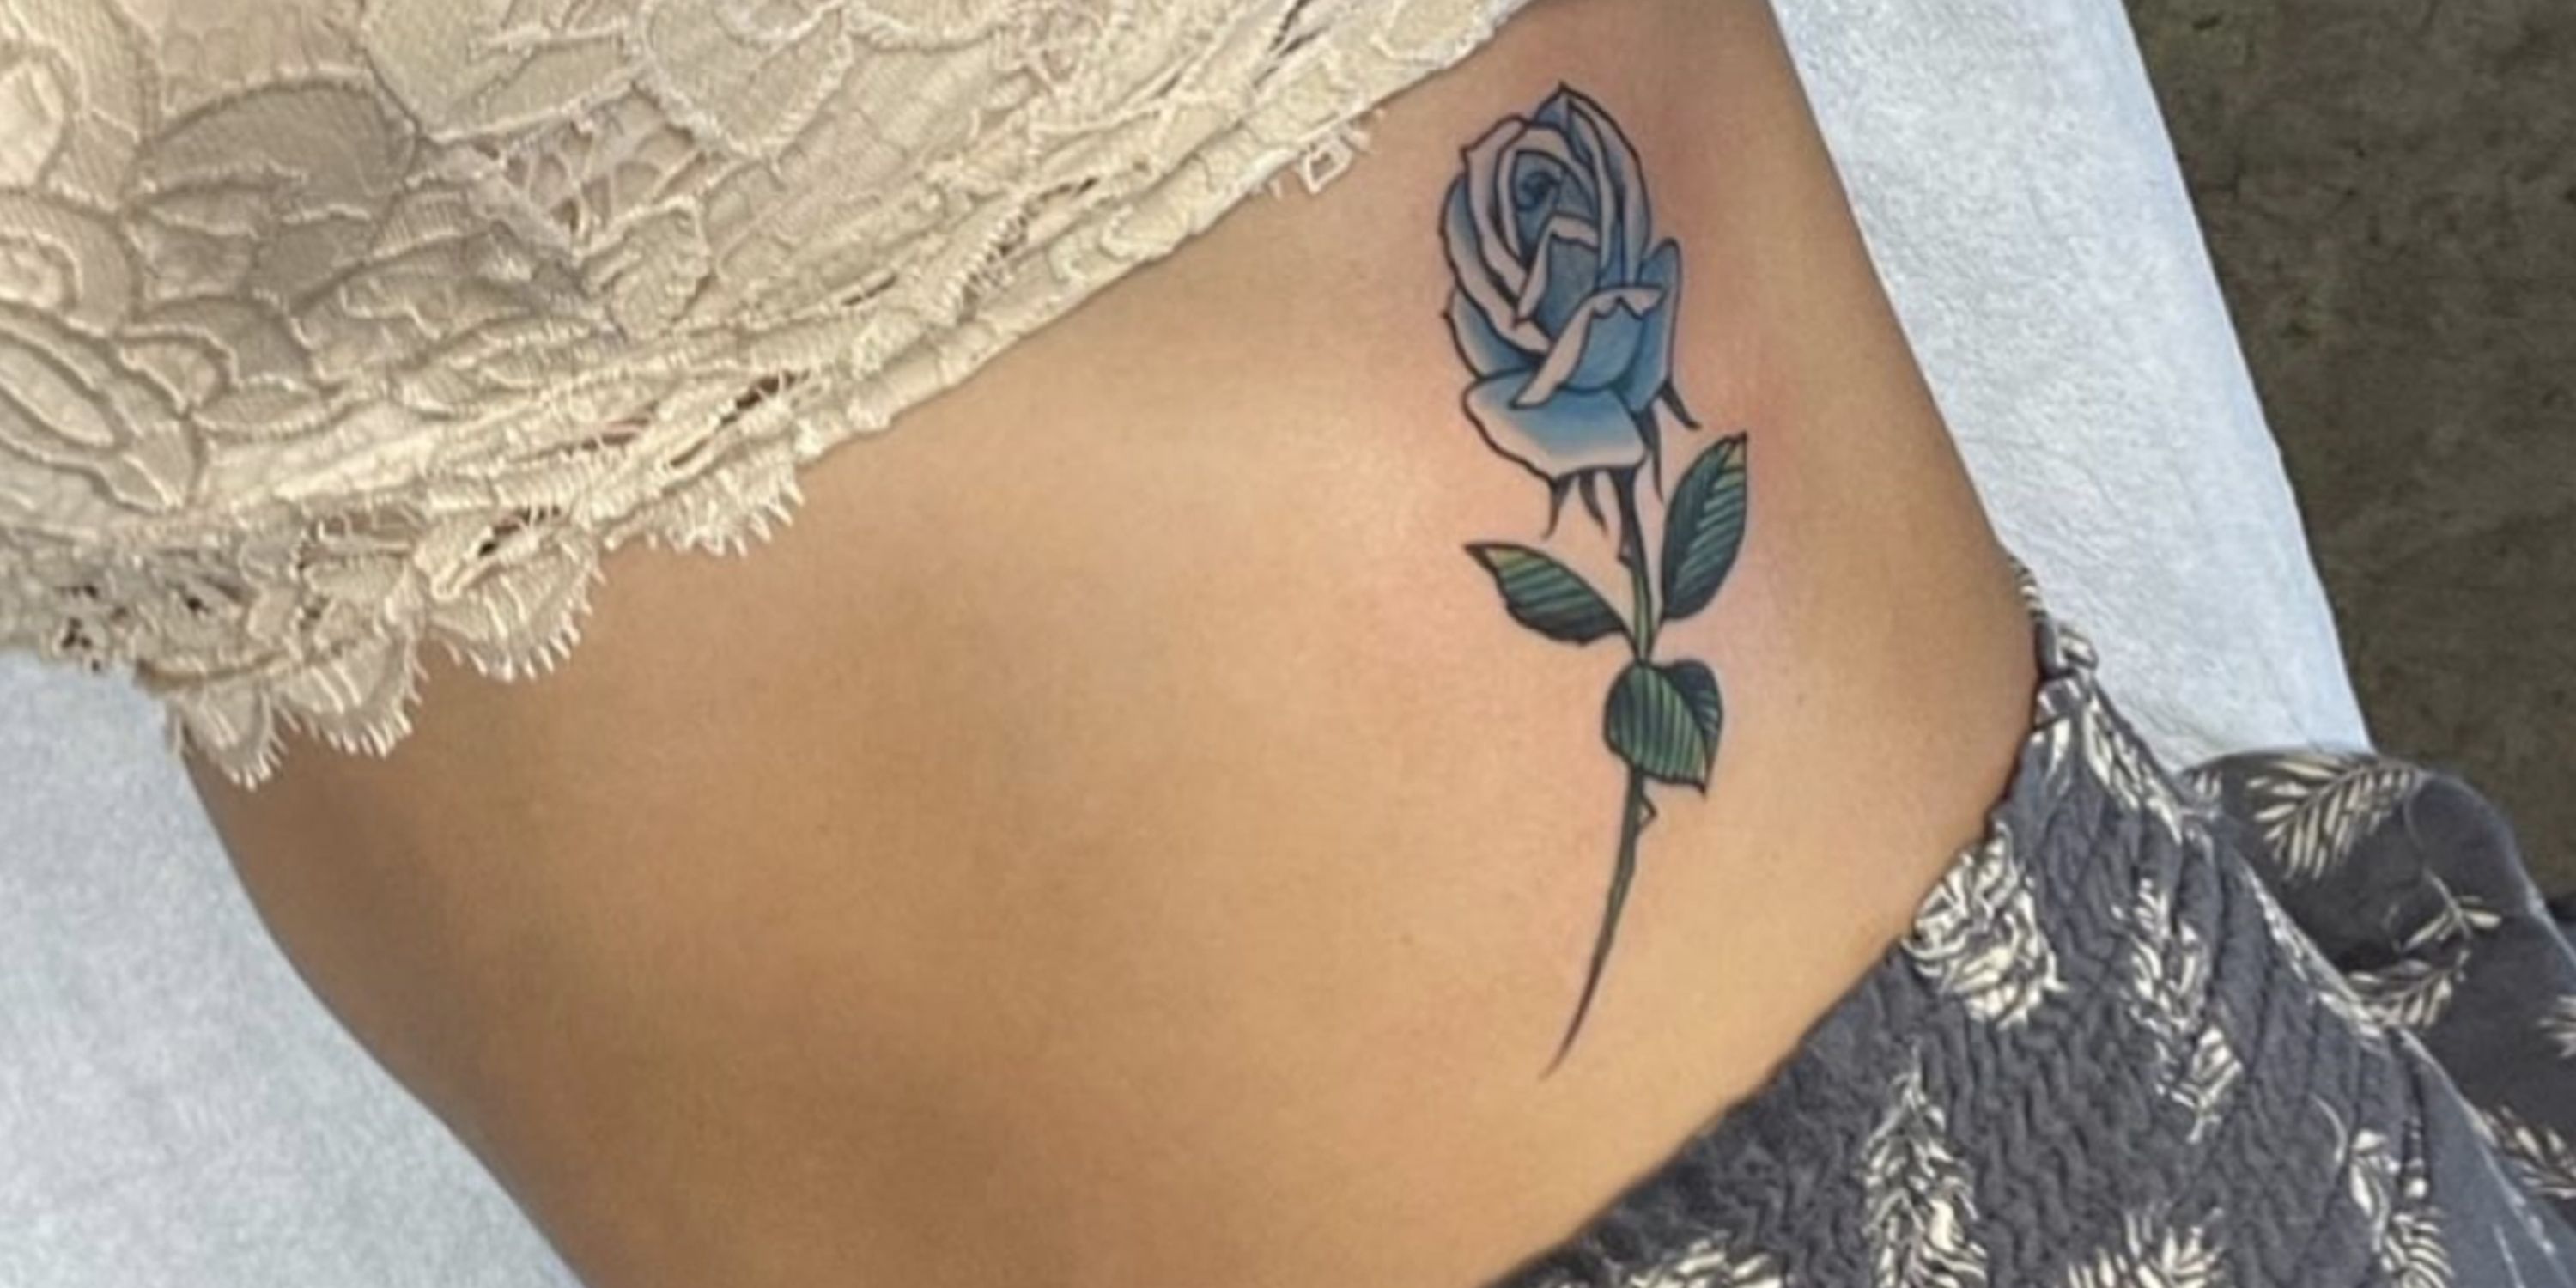 Liz Woods Blue Rose Tattoo from 90 Day Fiance